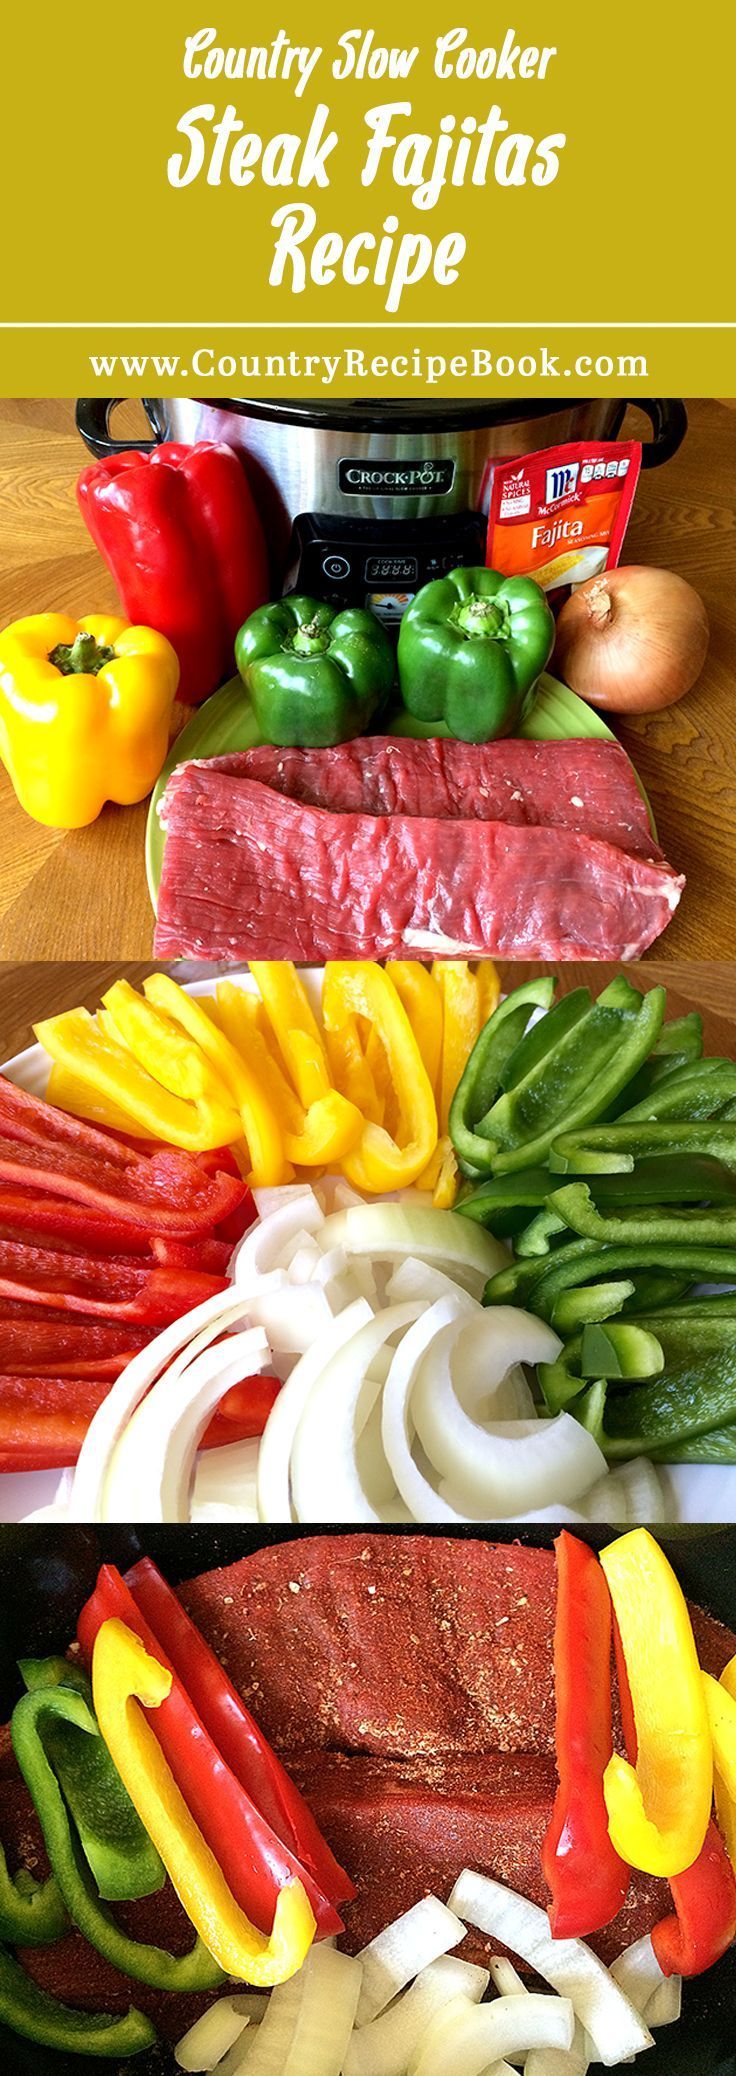 Make delicious steak fajitas in your slow cooker with this awesome recipe. Super easy to make.